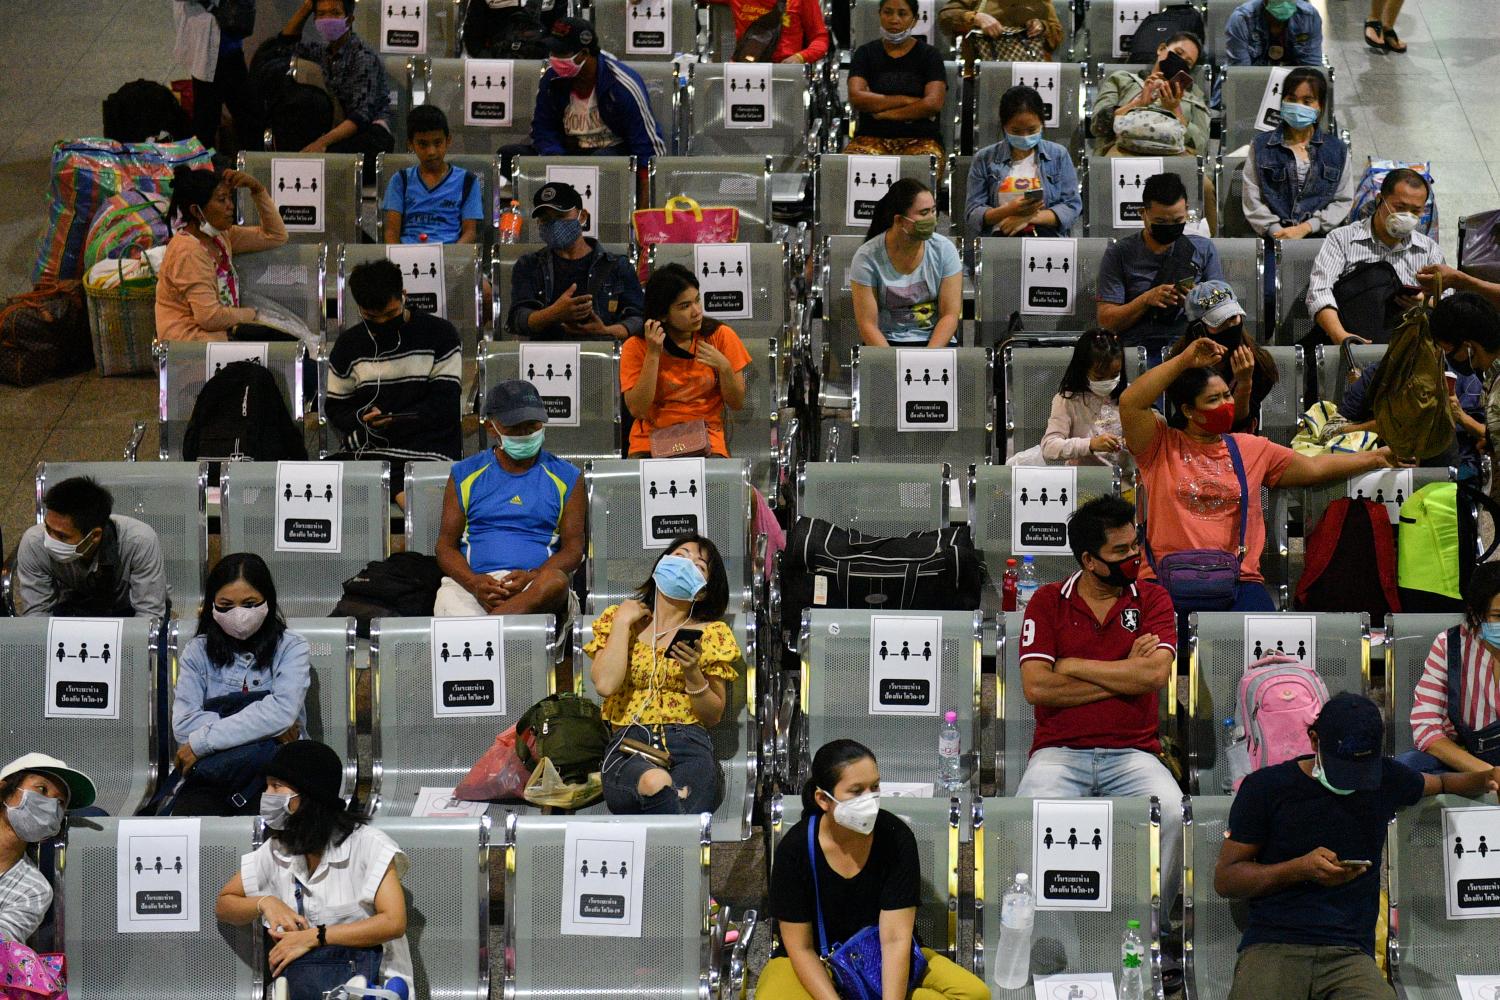 People wearing protective face masks, sit on social distancing benches at a bus station after many workers crowded the terminal station to return to their cities after many activities have been closed due to coronavirus disease (COVID-19) outbreak, Thailand March 22, 2020. REUTERS/Challinee Thirasupa     TPX IMAGES OF THE DAY